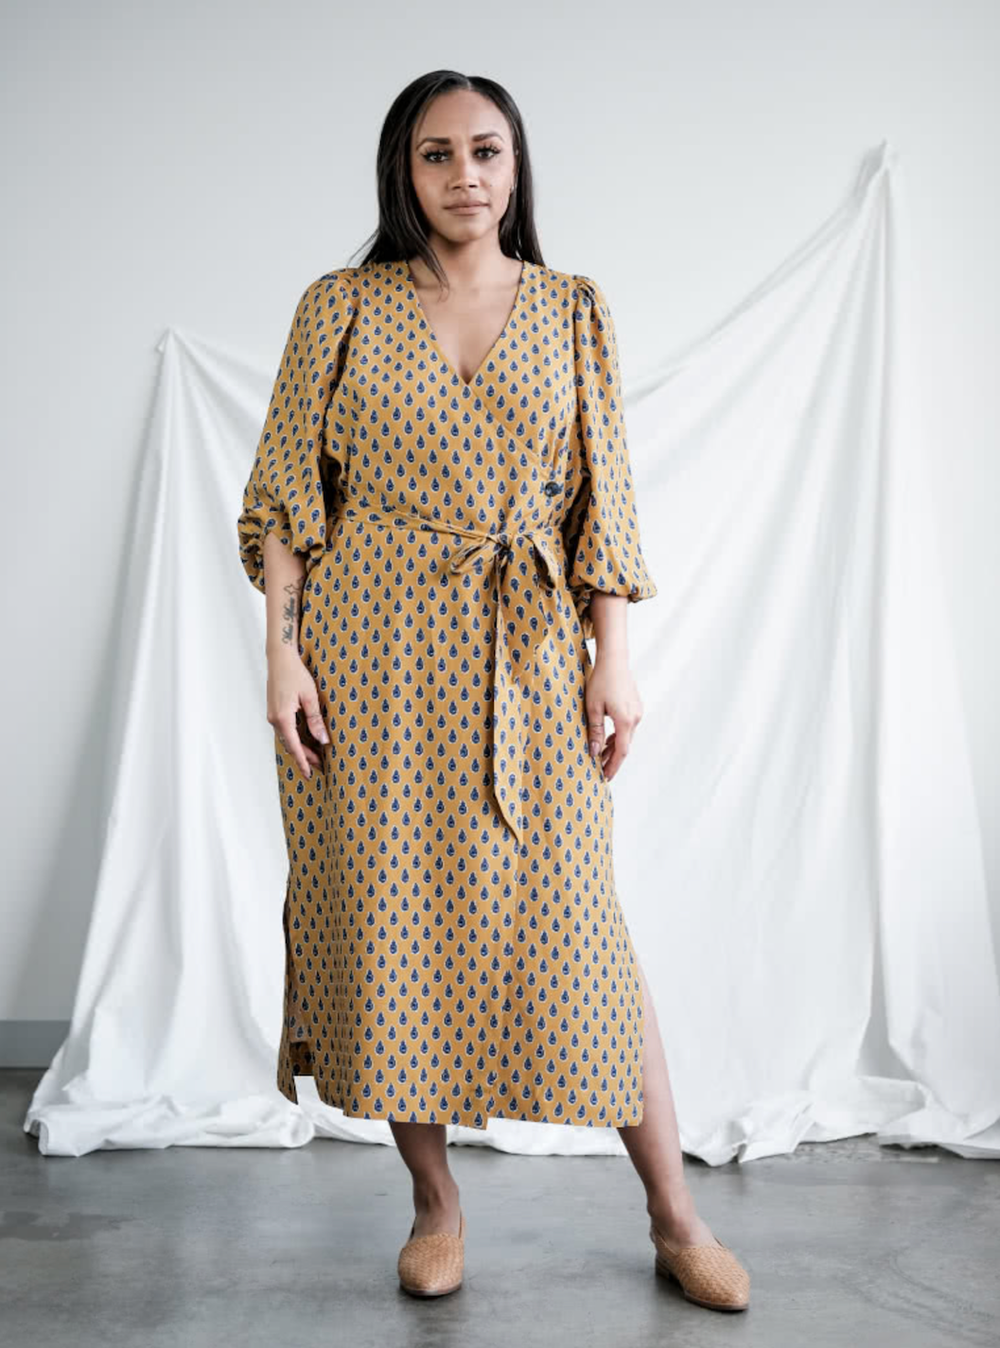 Woman wearing the Brigid Wrap Dress sewing pattern from Style Arc on The Fold Line. A wrap dress pattern made in silk, crepe, viscose or rayon fabrics, featuring a midi length, side button closure, V-neck, deep armhole feature, full sleeve with elastic op